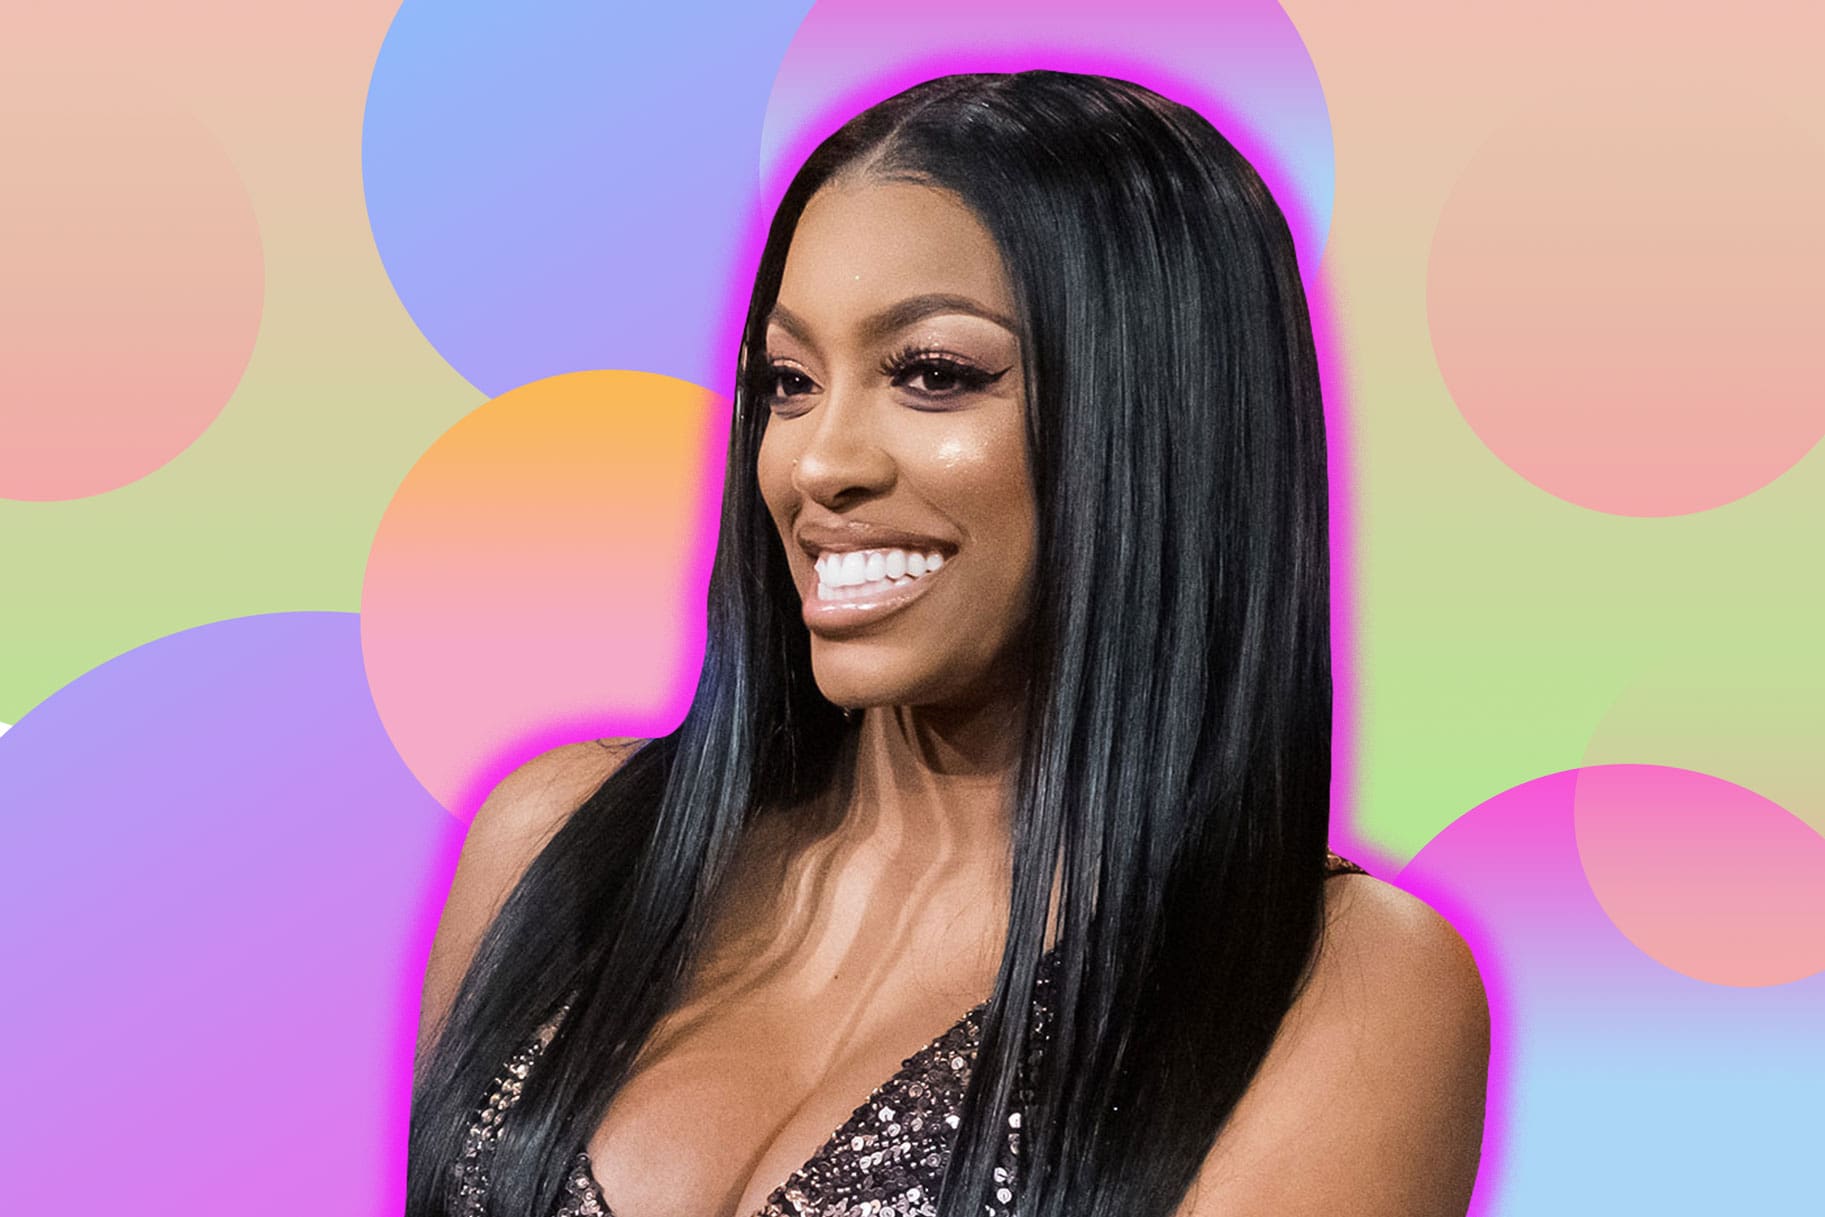 Porsha Williams Looks Gorgeous In Her Latest Pics With Dennis McKinley And Her Friends